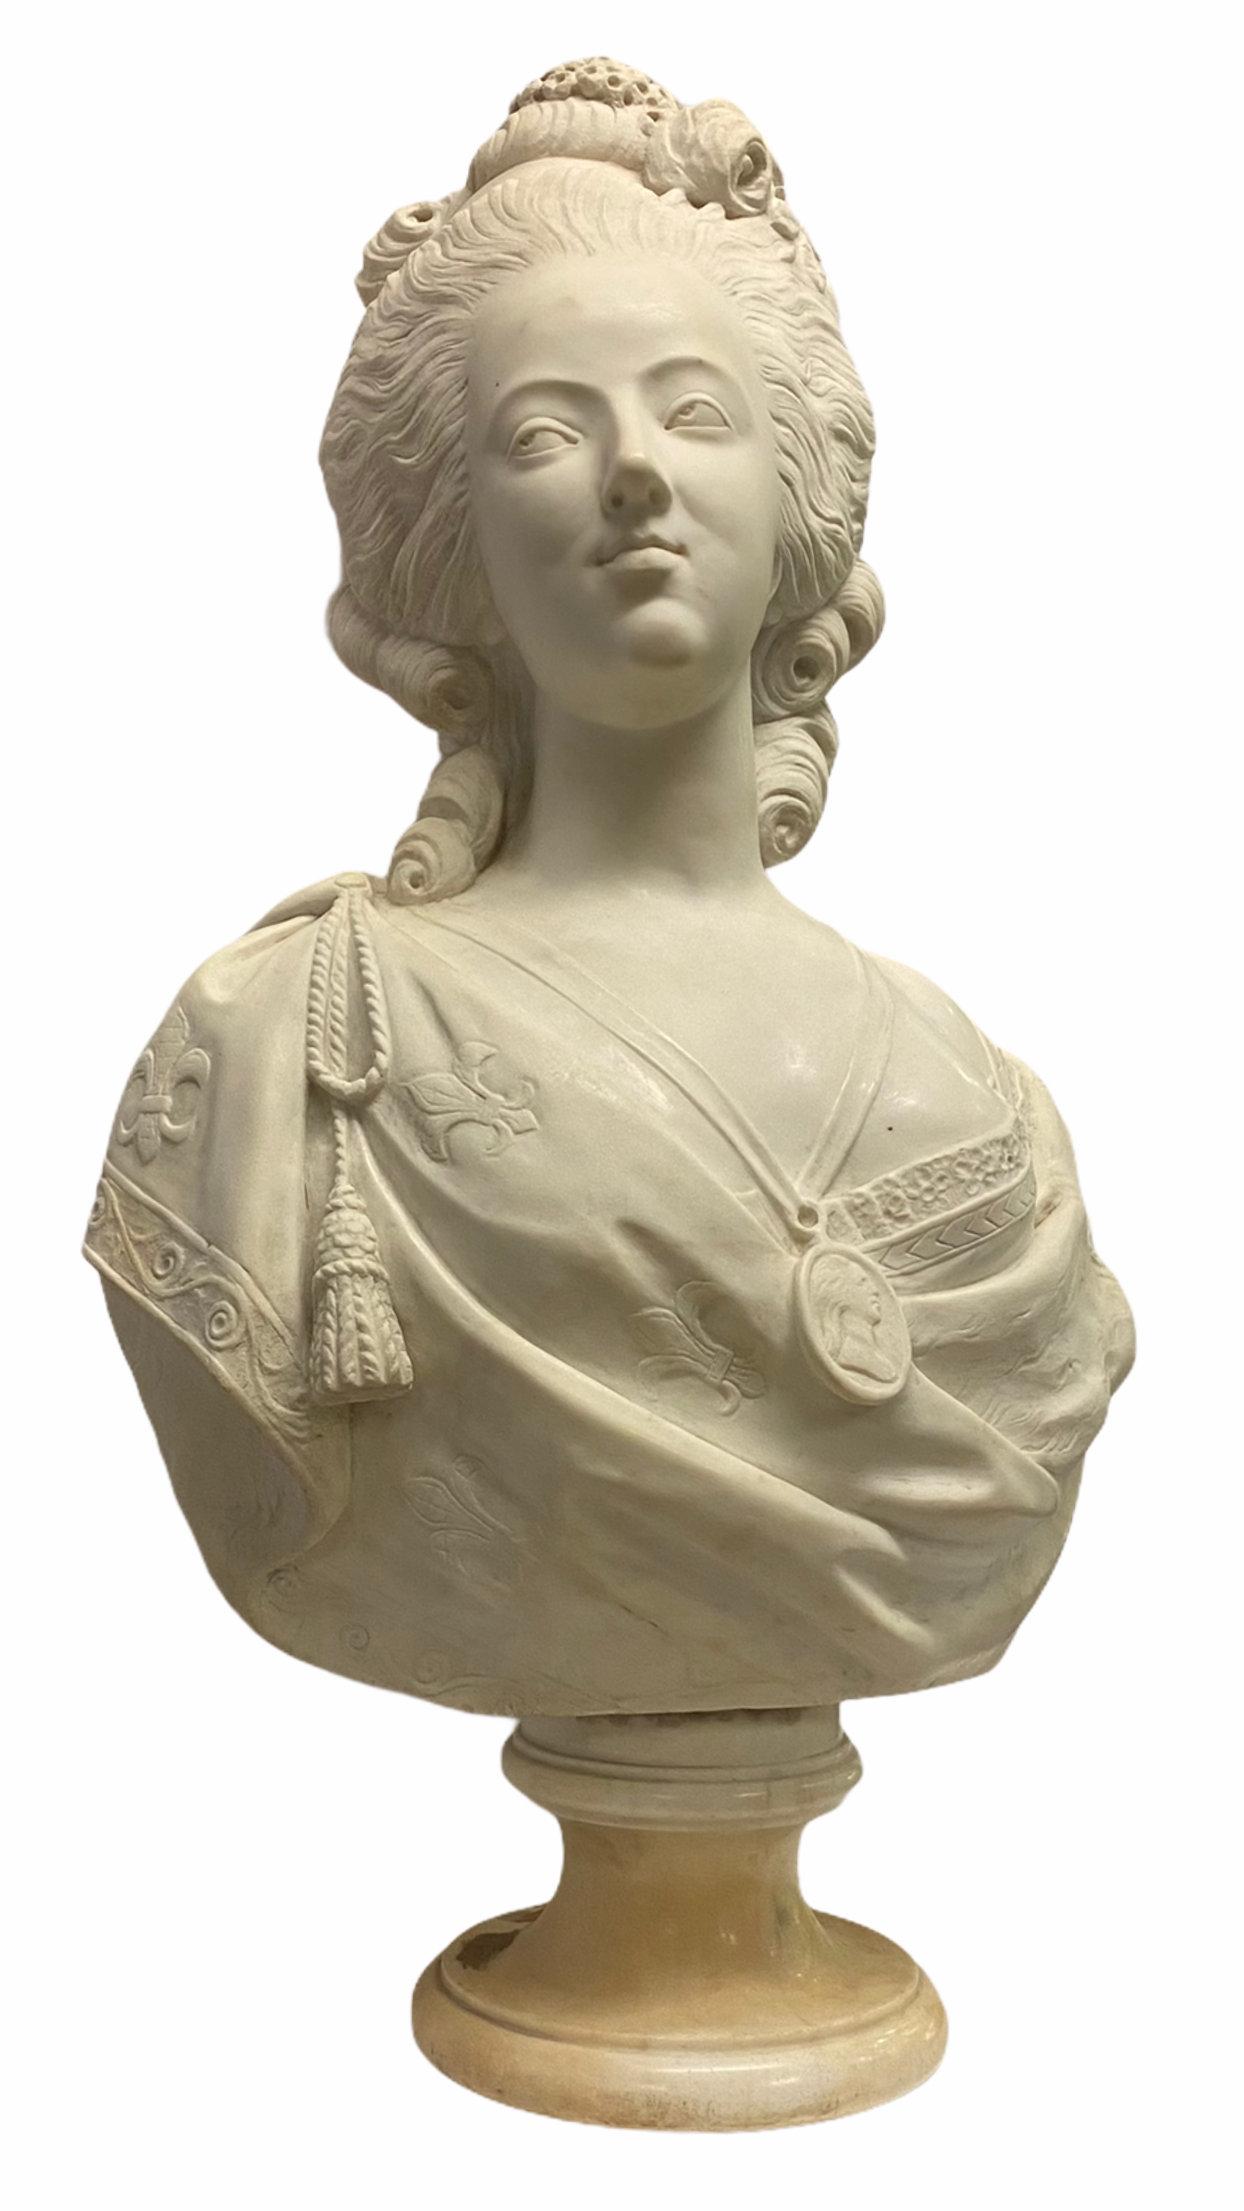 Very finely carved French 19th century Marie Antoinette marble bust.
Unsigned.